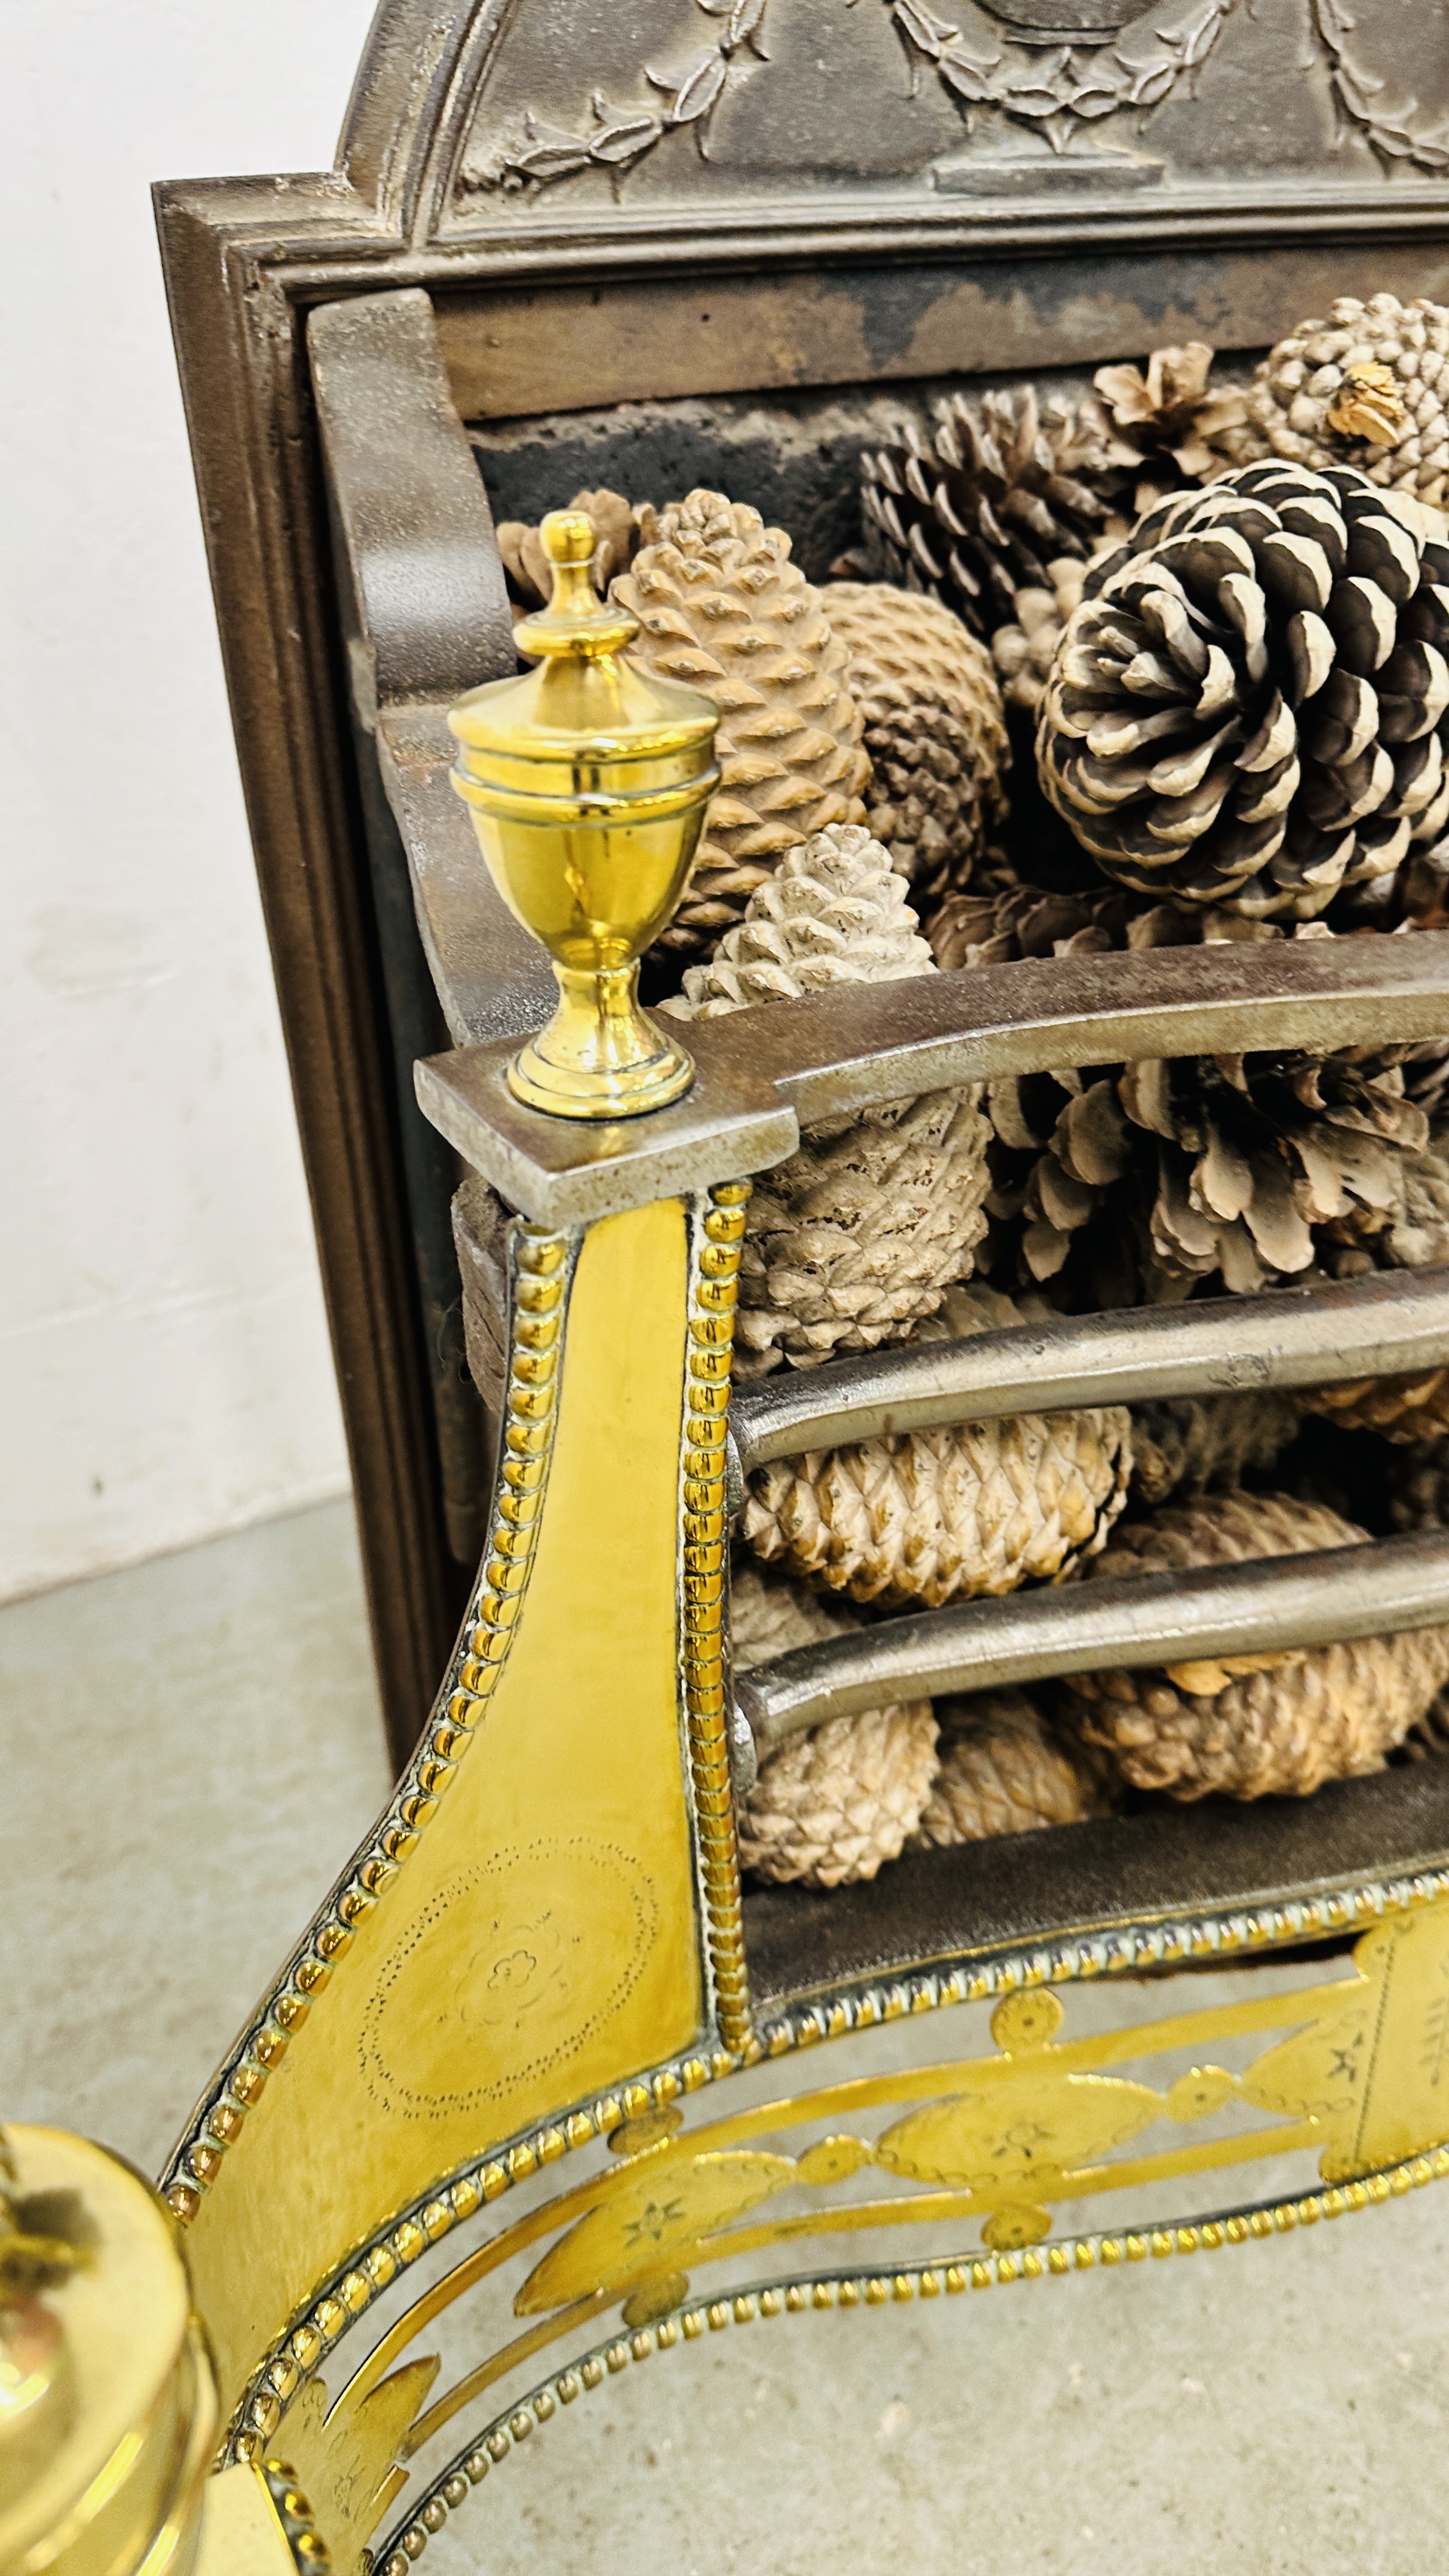 IMPRESSIVE HEAVY CAST FIRE BASKET WITH BRASS DETAILING - OVERALL WIDTH 83CM. - Image 10 of 11